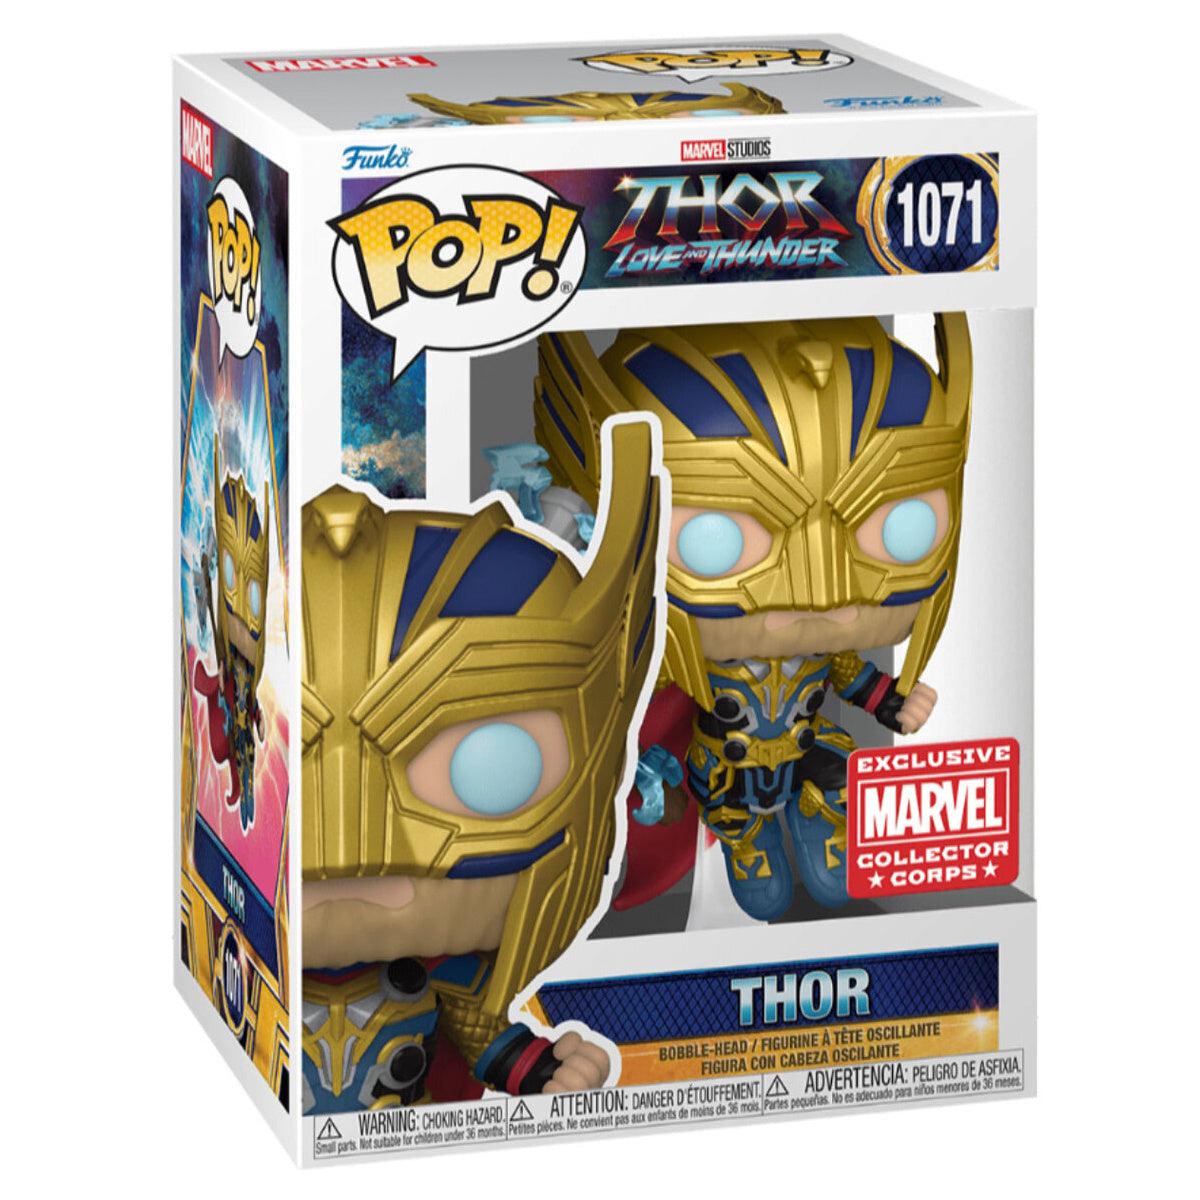 Funko POP: Marvel Thor Love and Thunder #1071 Marvel Collector Corps Exclusive